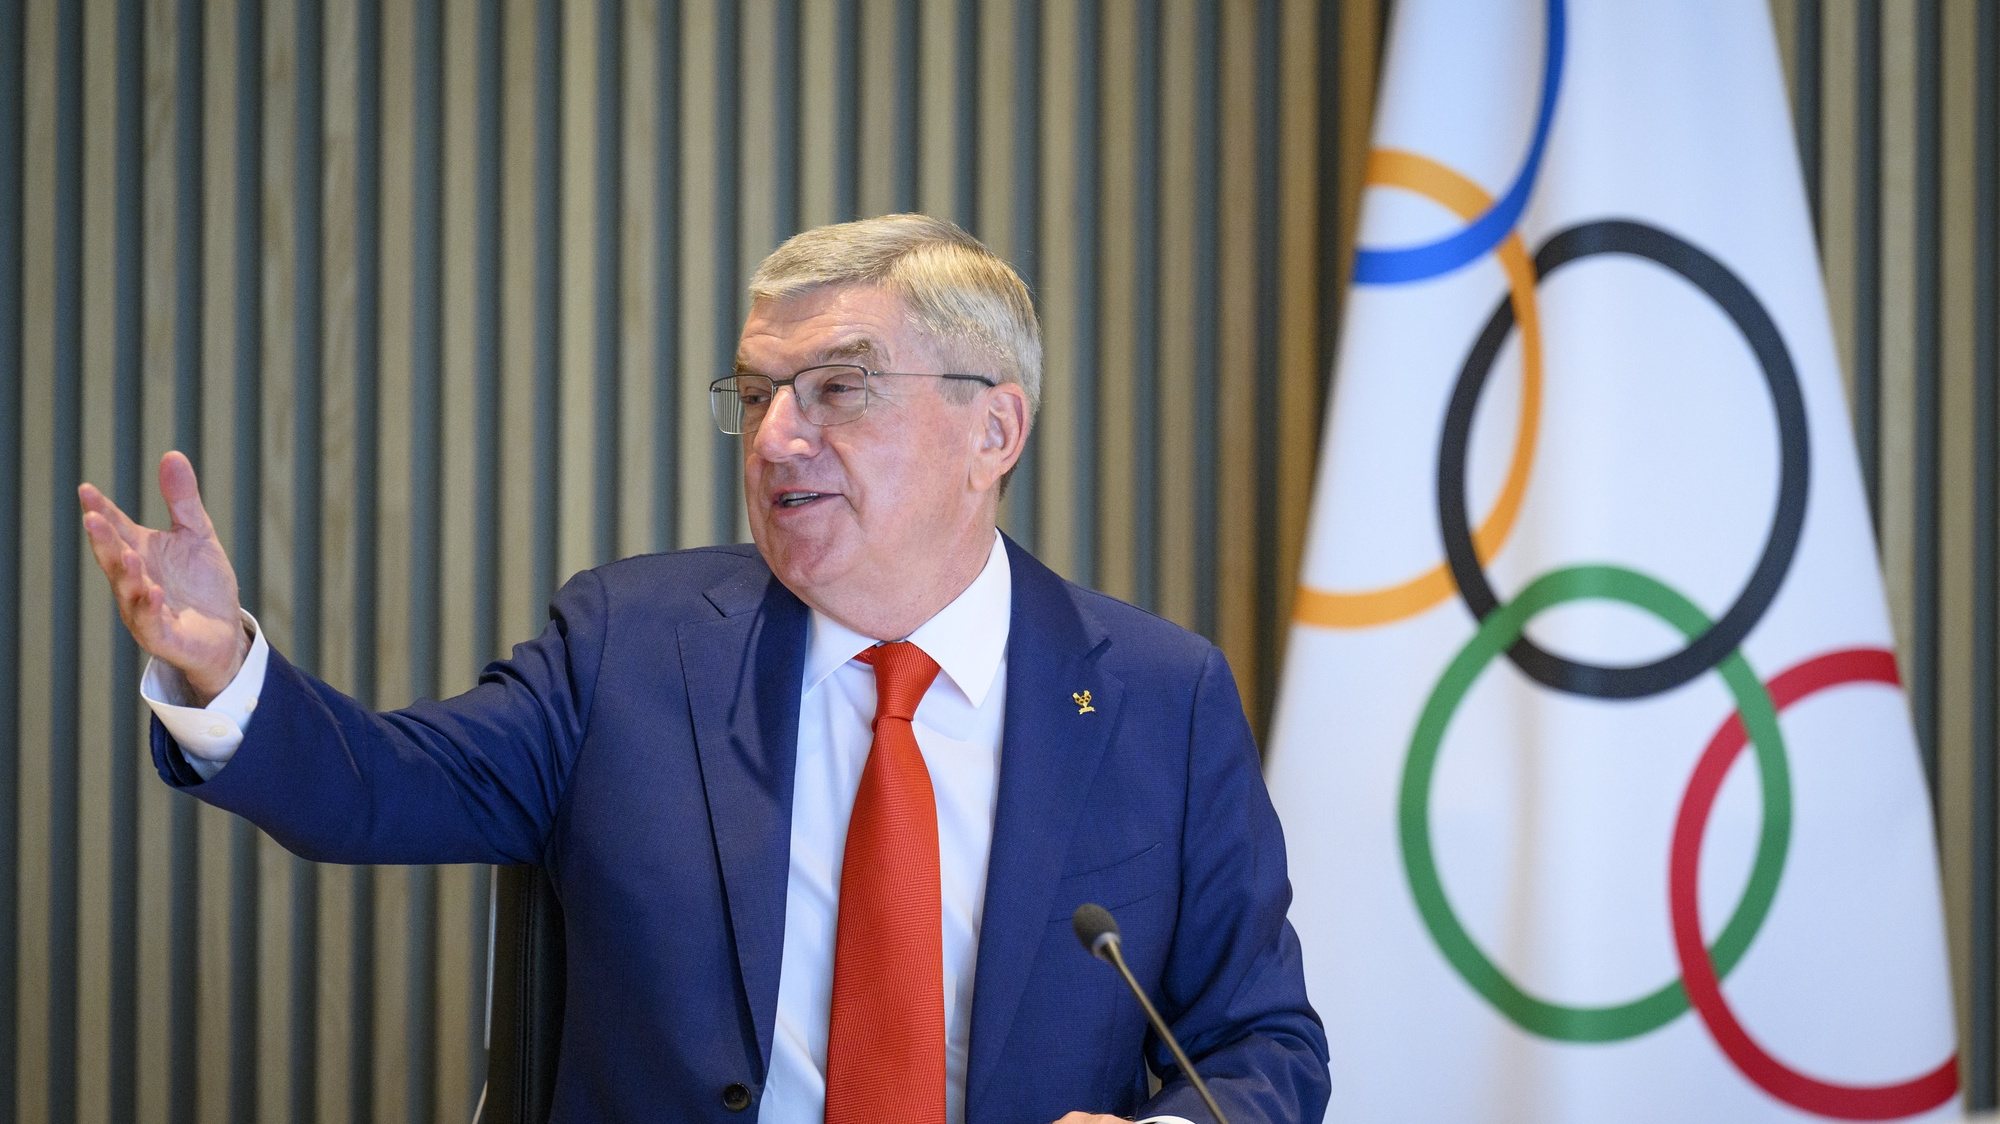 epa10701185 International Olympic Committee (IOC) President Thomas Bach gestures as he speaks at the opening at the opening of the executive board meeting of the International Olympic Committee, at the Olympic House, in Lausanne, Switzerland, 20 June 2023.  EPA/LAURENT GILLIERON